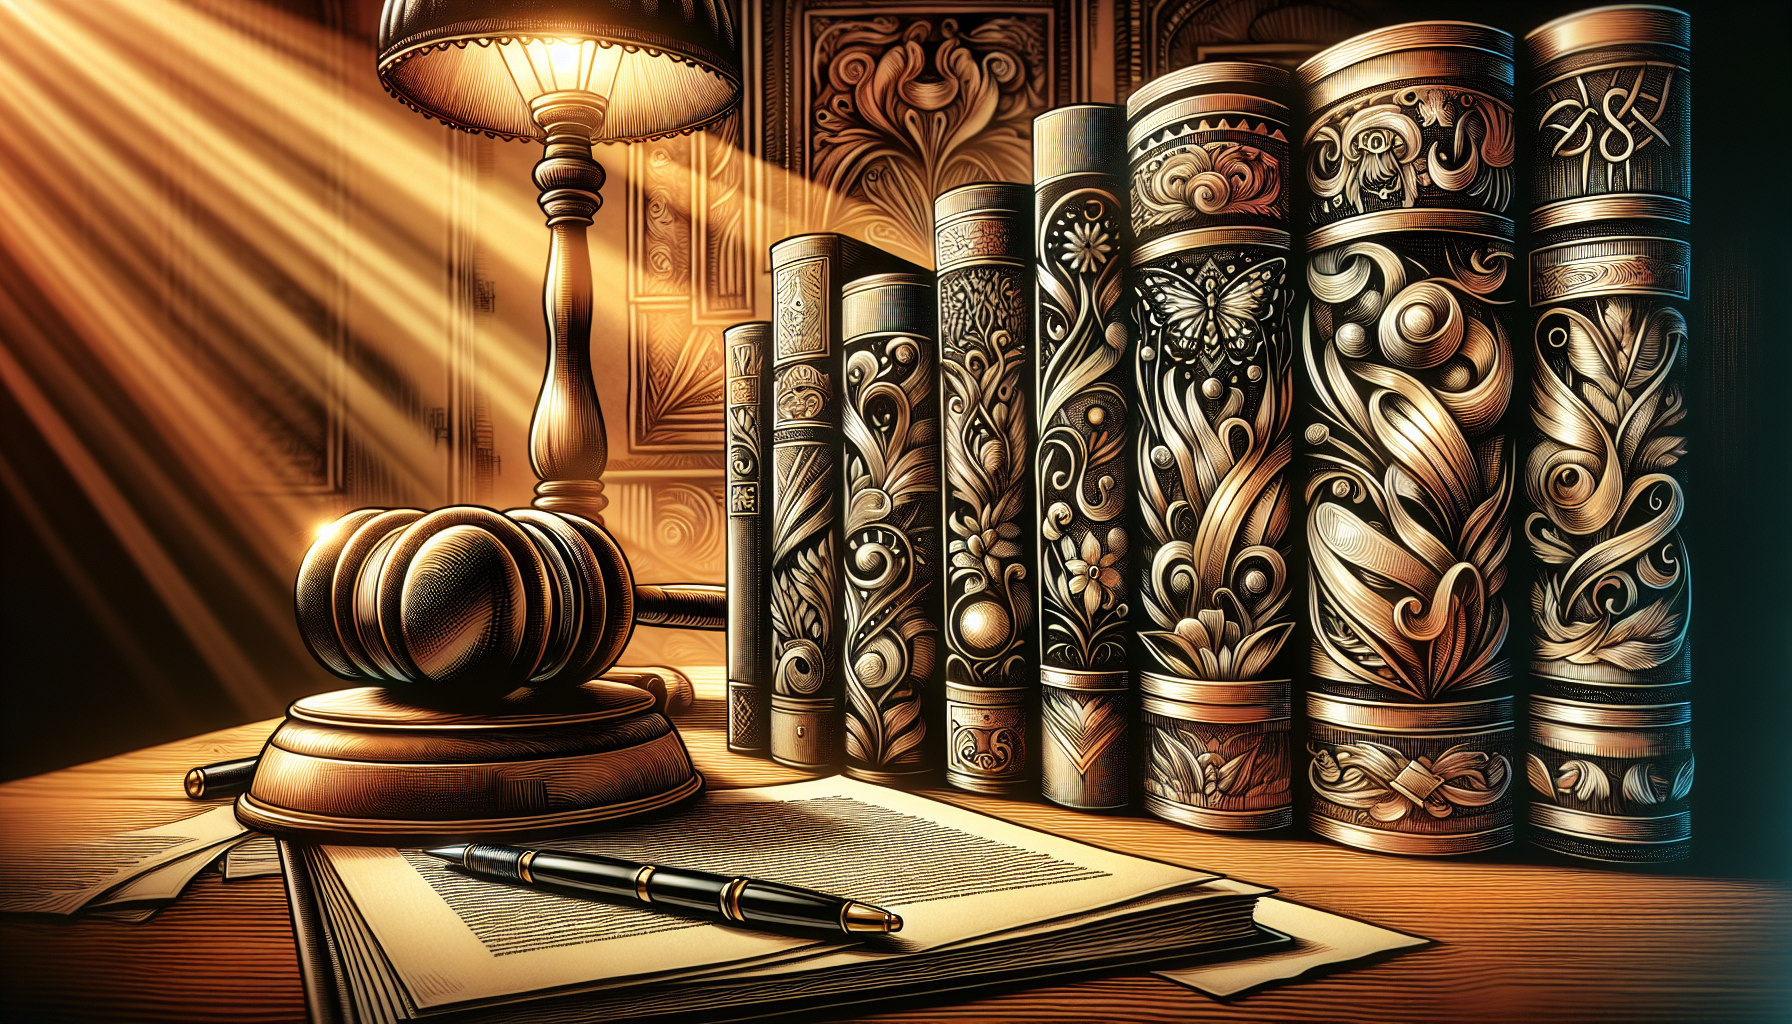 Illustration of legal documents and a gavel